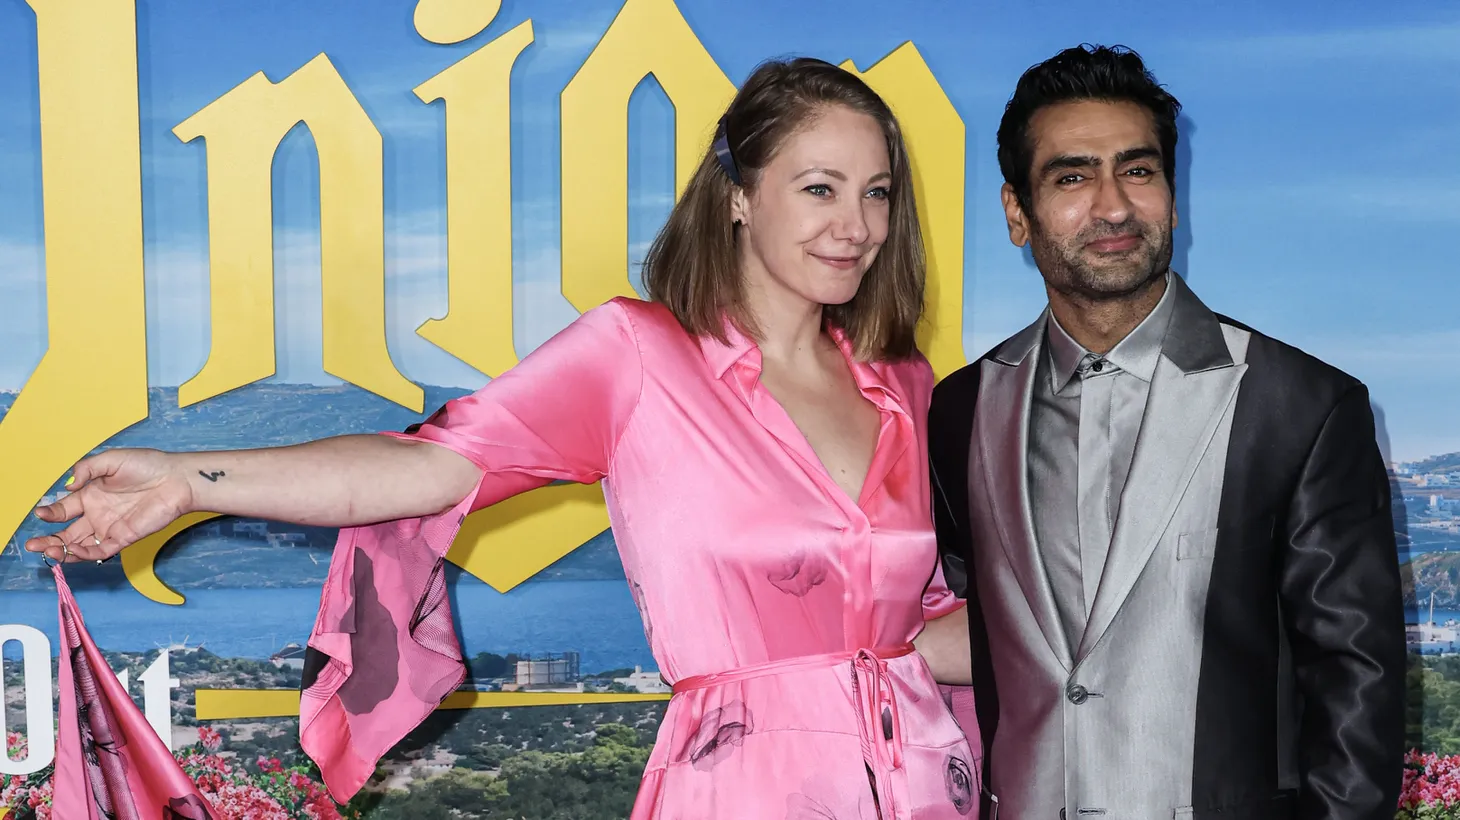 Emily V. Gordon and Kumail Nanjiani arrive at the US Premiere Of Netflix's “Glass Onion: A Knives Out Mystery” held at the Academy Museum of Motion Pictures in Los Angeles, on November 14, 2022.